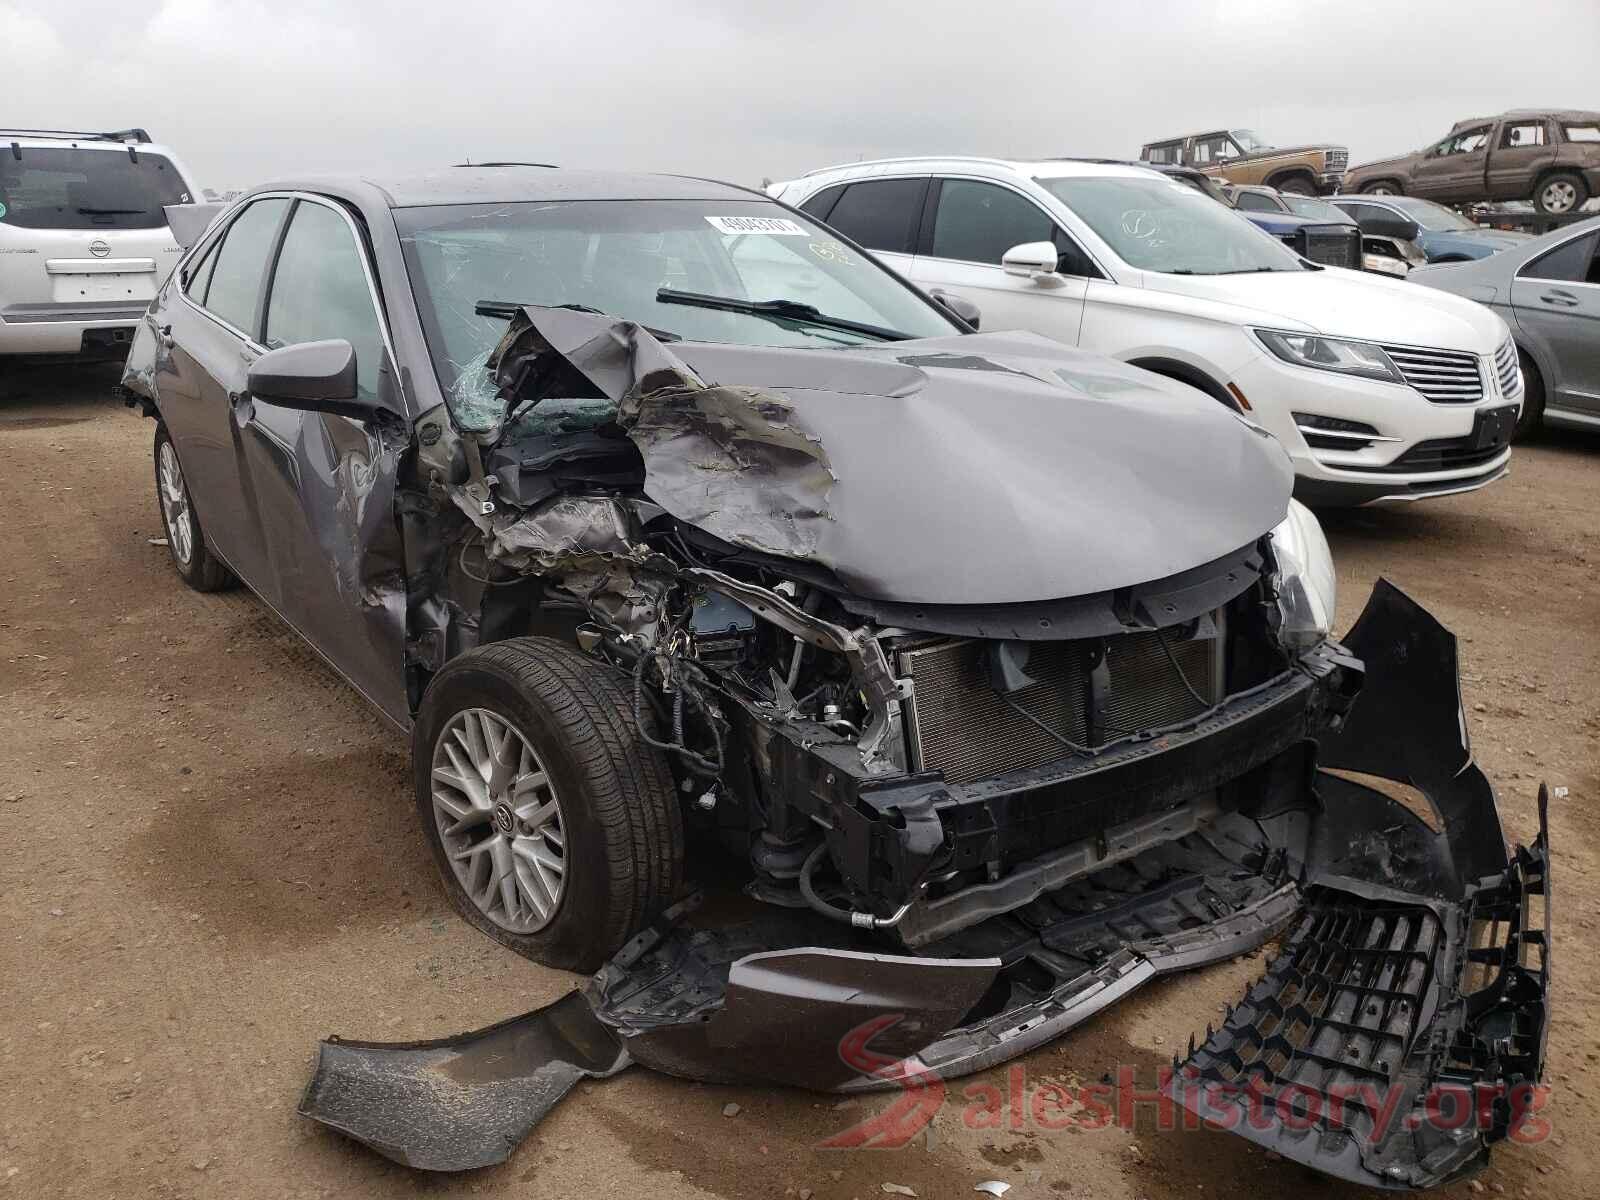 4T4BF1FK2GR541075 2016 TOYOTA CAMRY